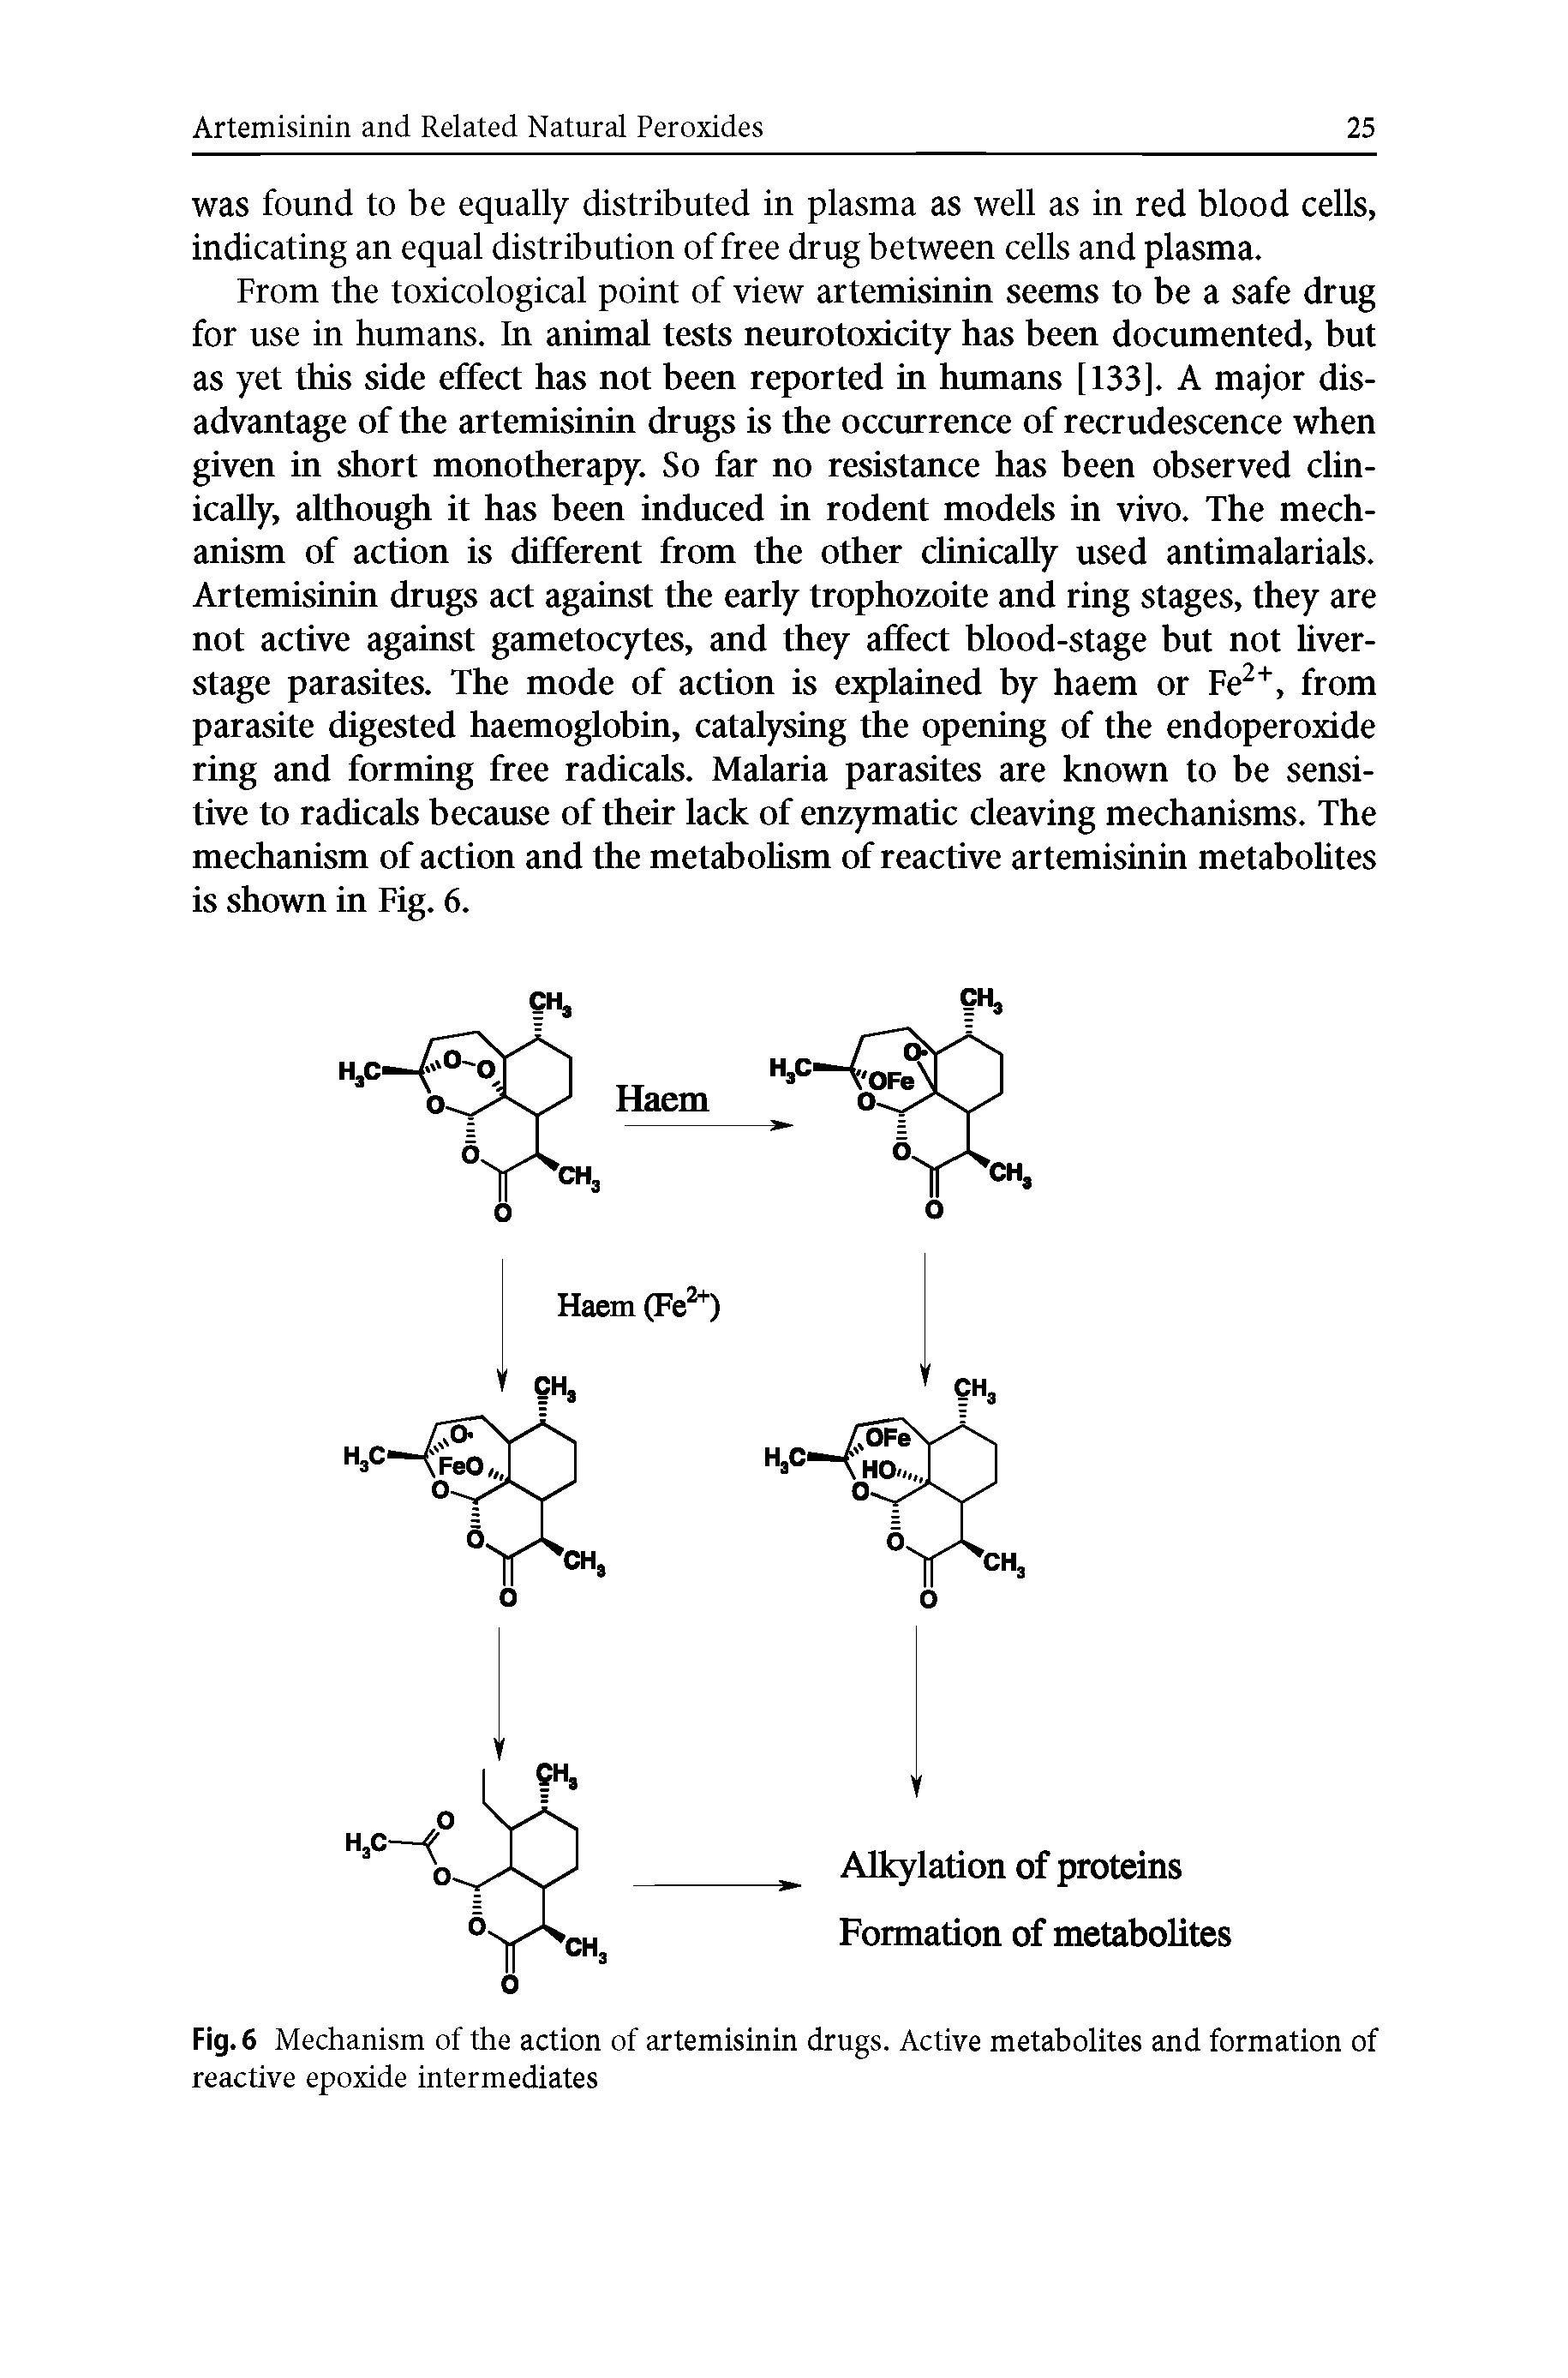 Fig. 6 Mechanism of the action of artemisinin drugs. Active metabolites and formation of reactive epoxide intermediates...